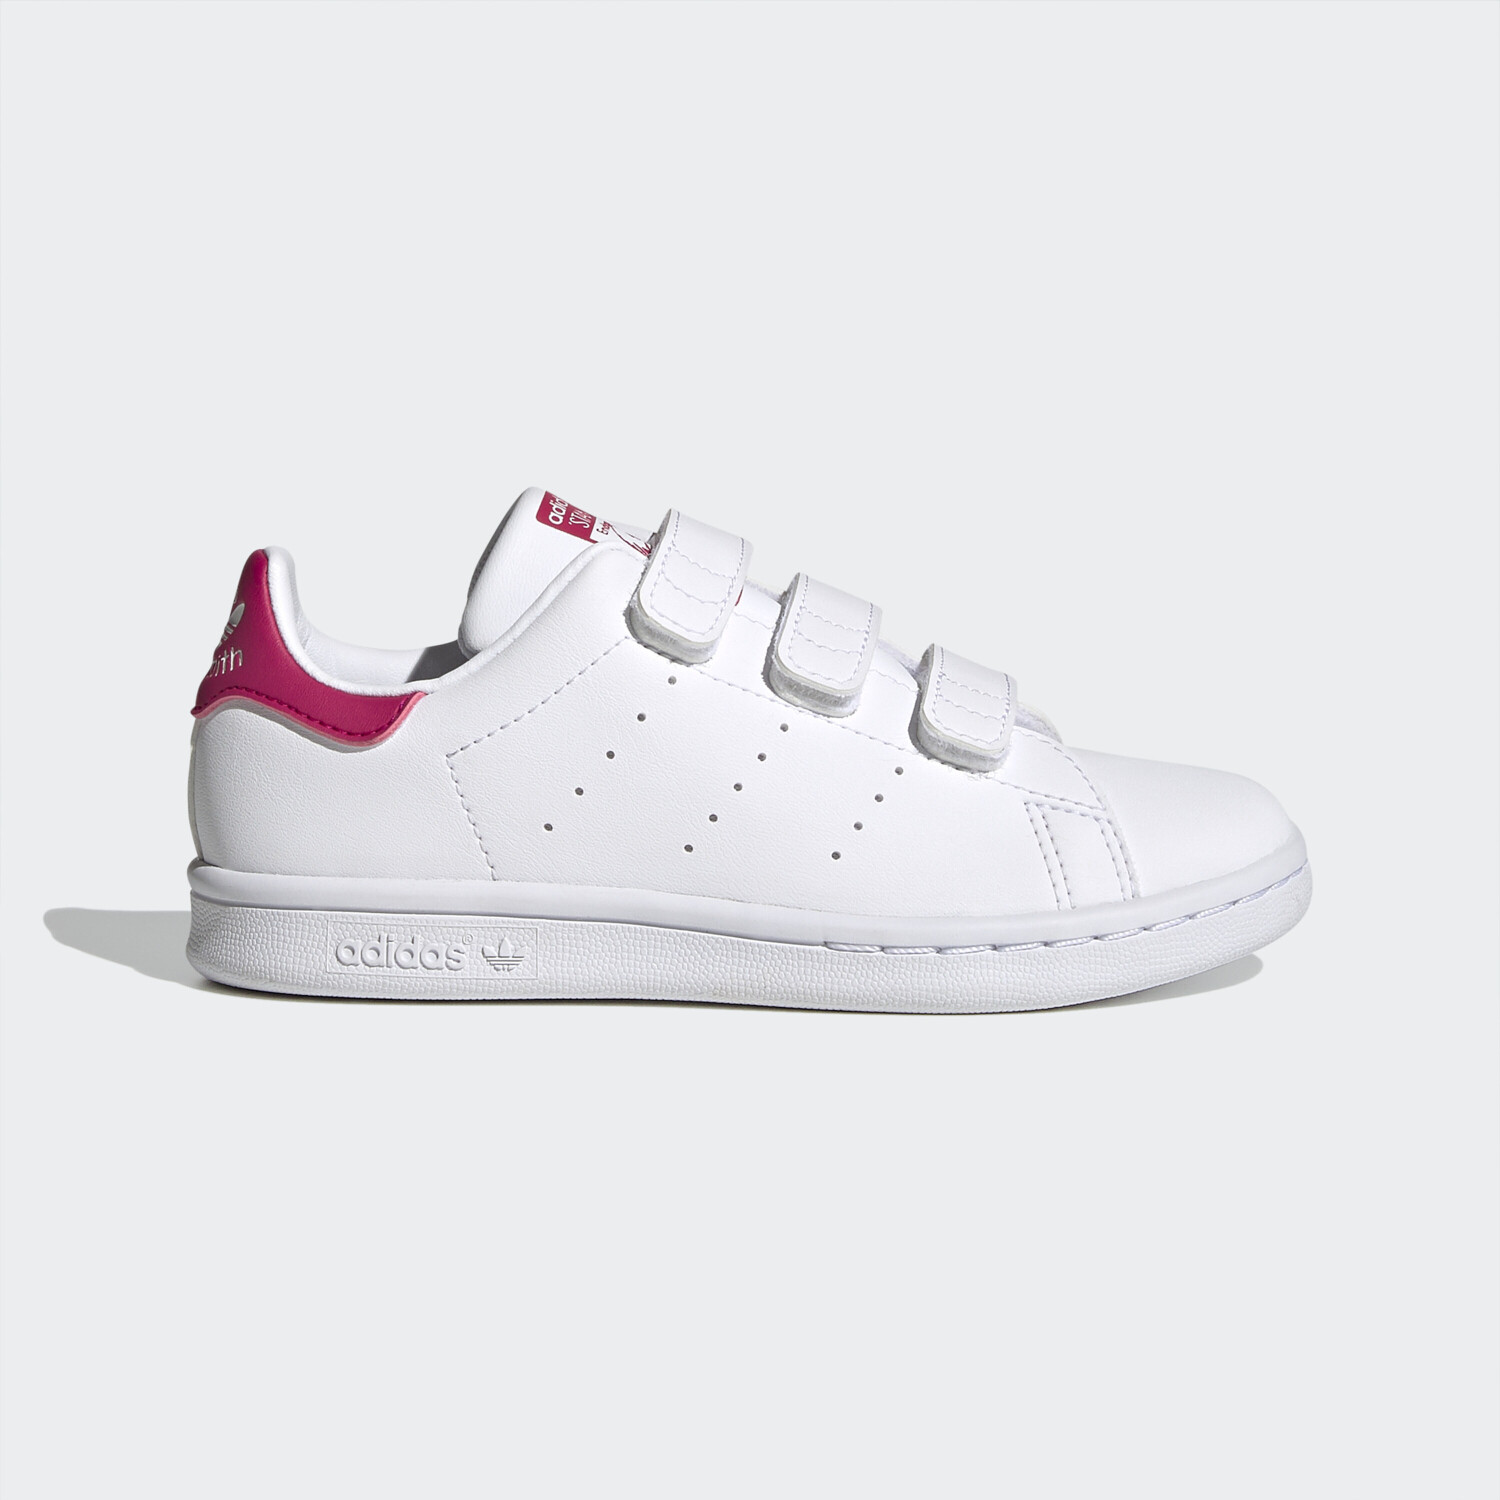 Smith Cloud Adidas on – Pink Stan White/Bold Kinder Deals from £32.50 Buy White/Cloud (Today) Best